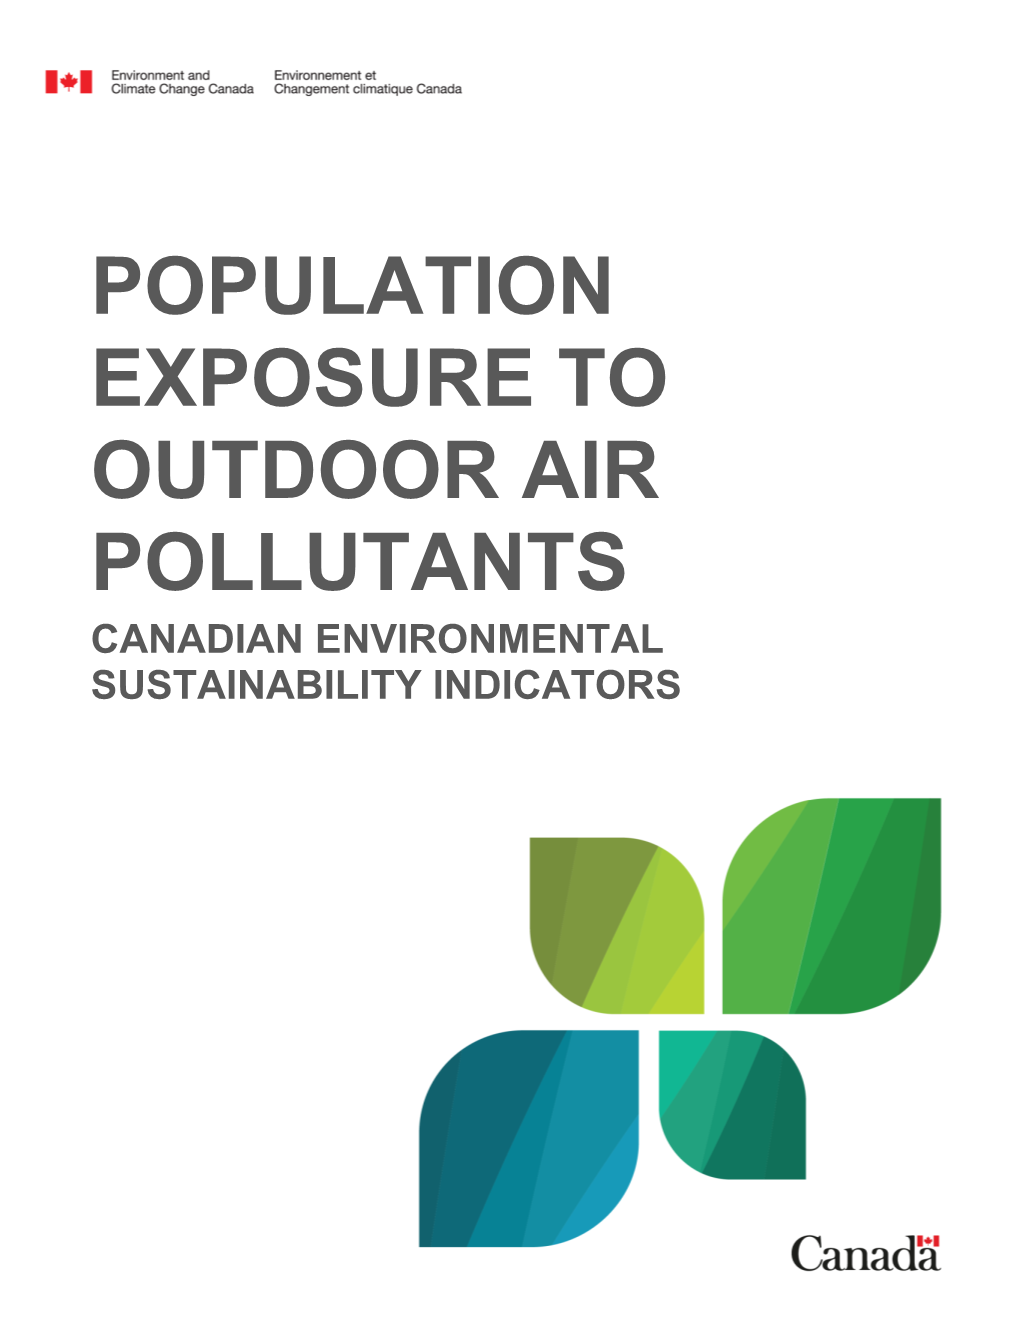 Population Exposure to Outdoor Air Pollutants Canadian Environmental Sustainability Indicators